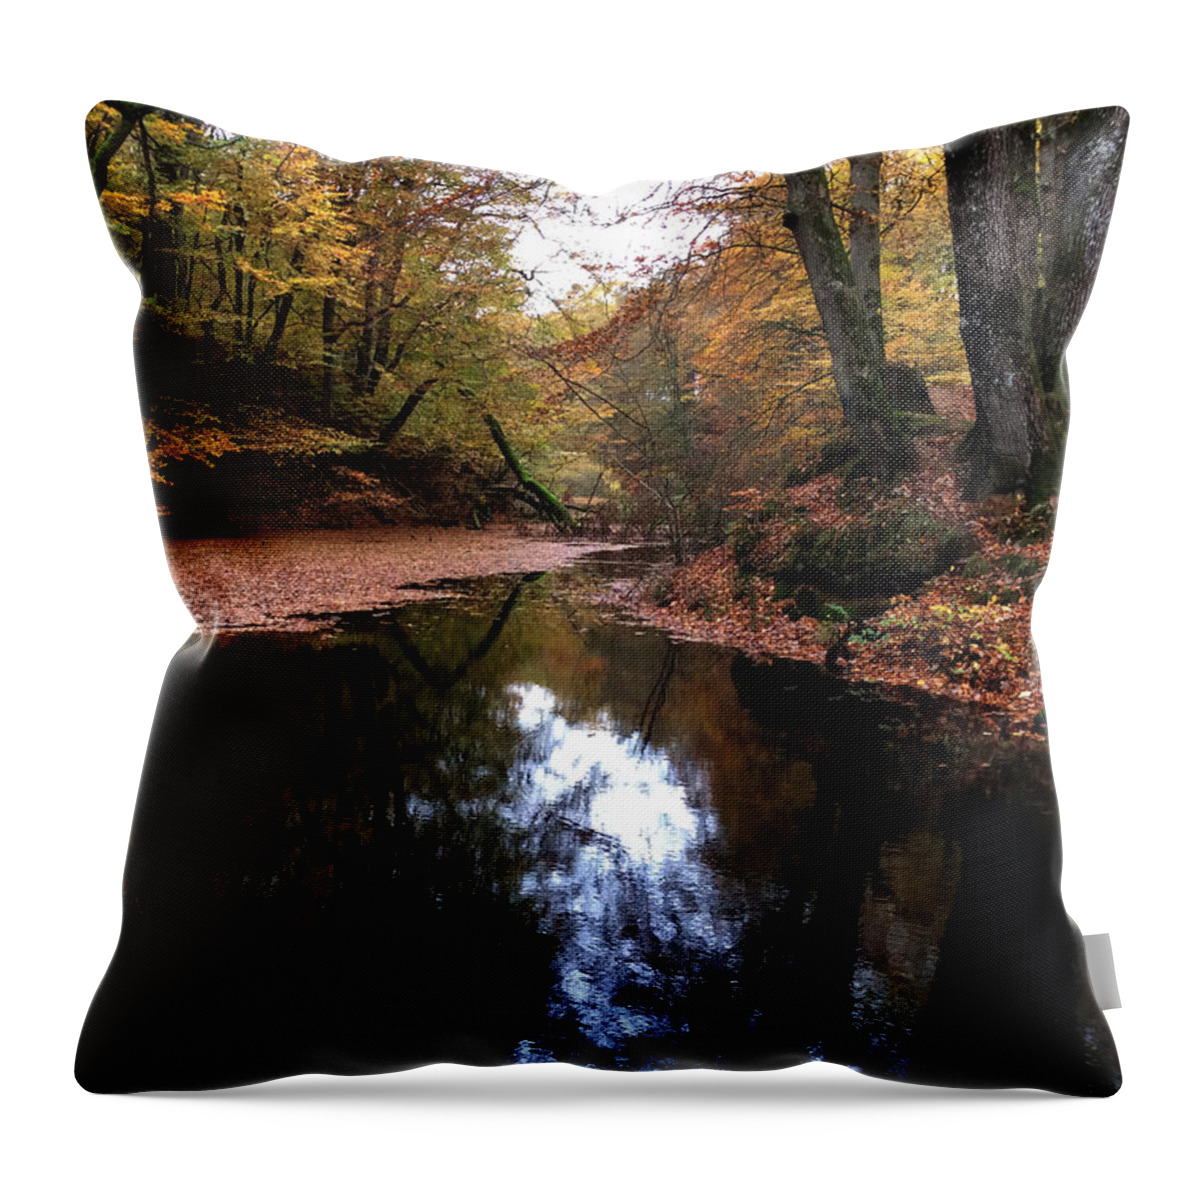 Colette Throw Pillow featuring the photograph Autumn Weather Denmark by Colette V Hera Guggenheim